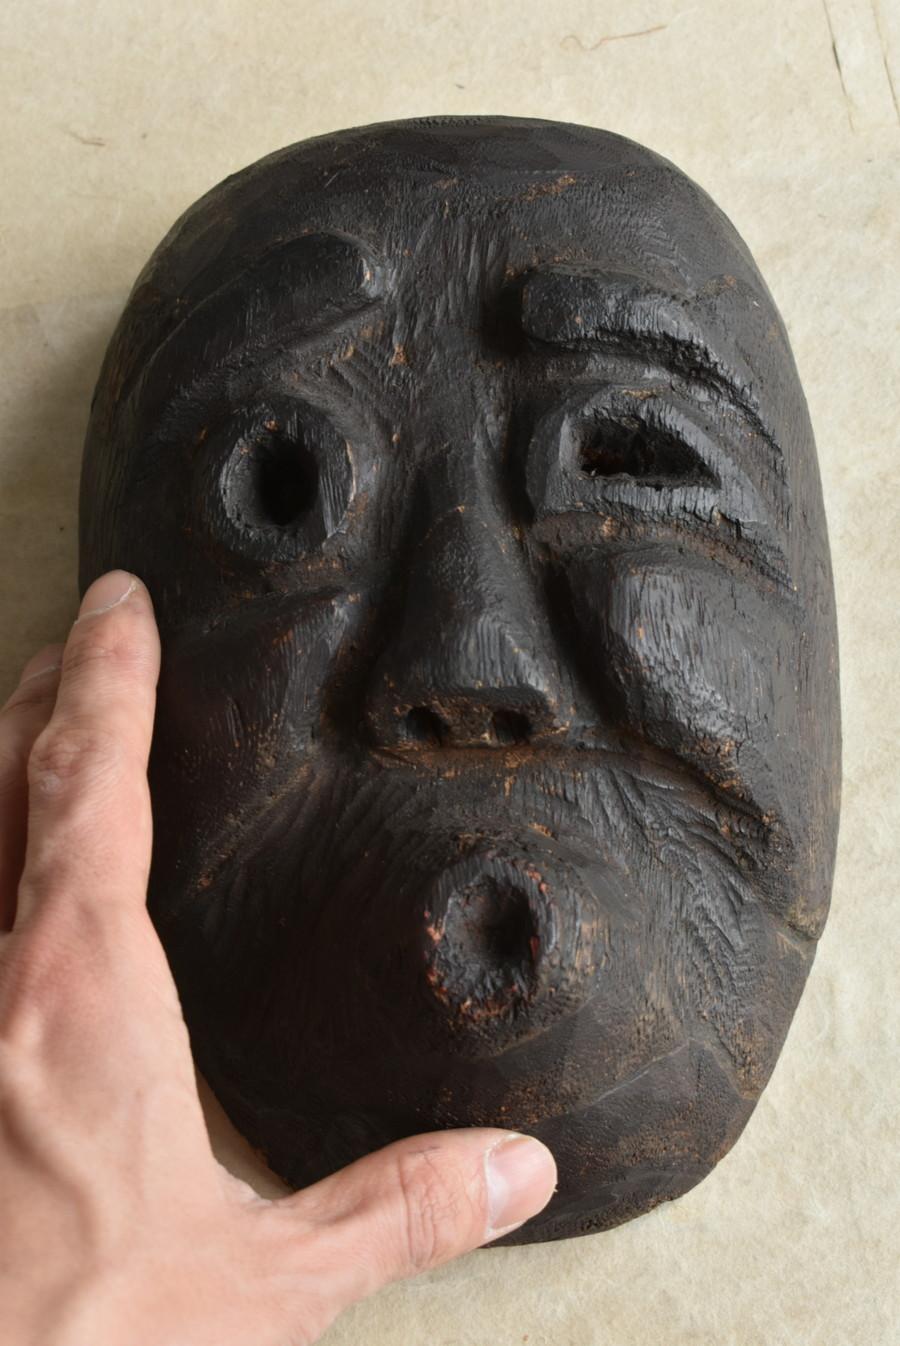 Japan has a culture of masks since ancient times, and they are sometimes used in Shinto rituals and temple events.
This mask called 